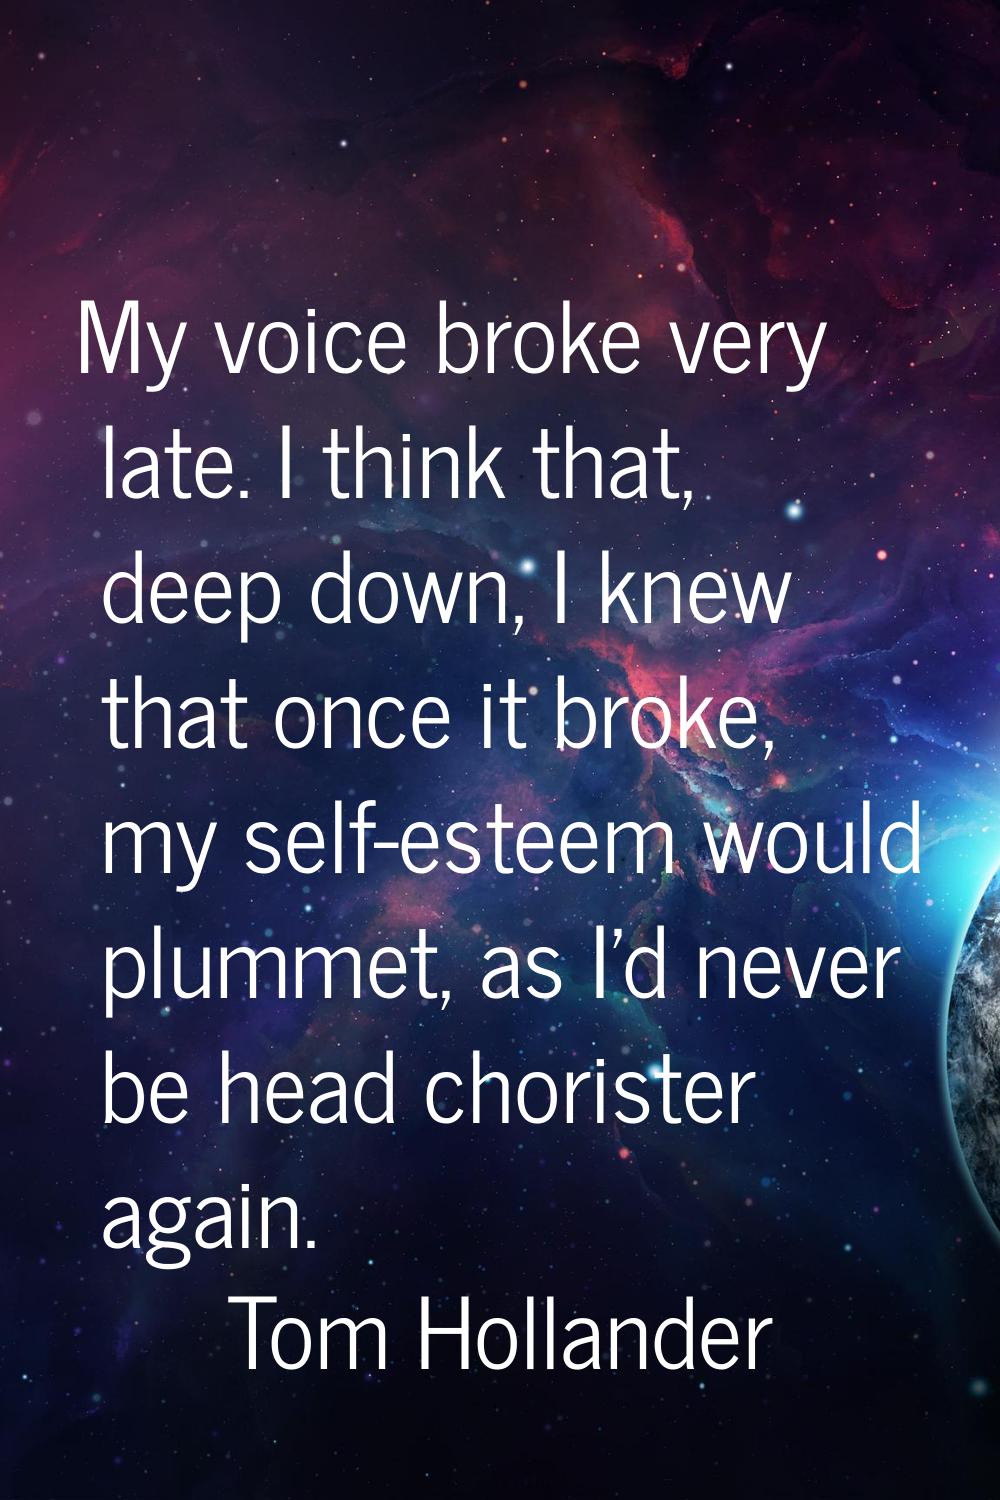 My voice broke very late. I think that, deep down, I knew that once it broke, my self-esteem would 